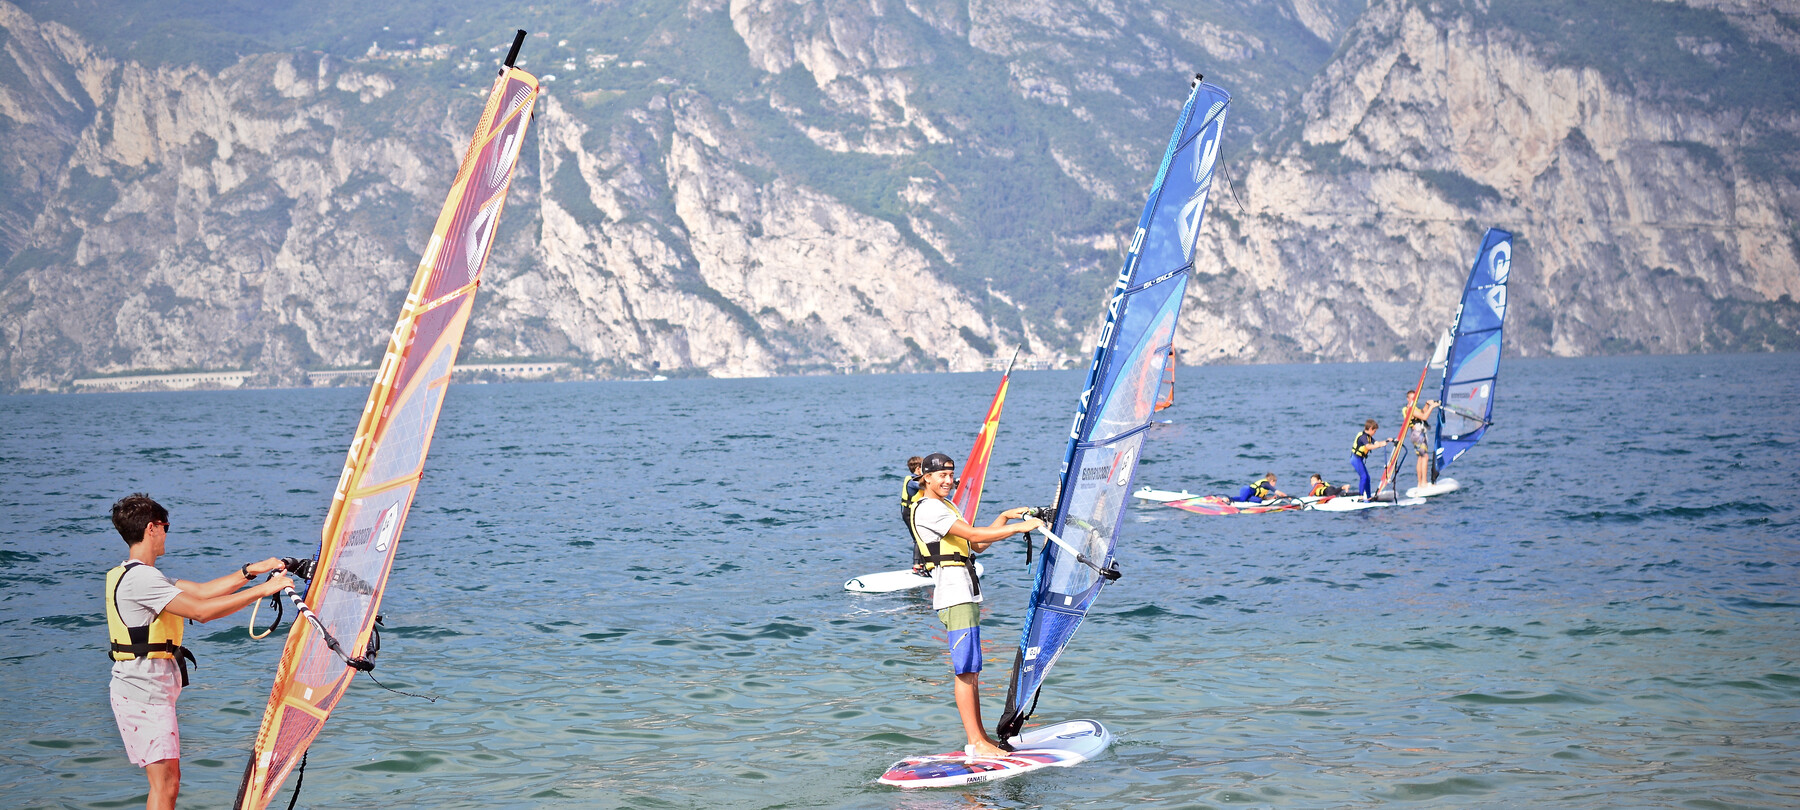 The lakes in Trentino: the story of Nicolò and windsurfing on Lake Garda